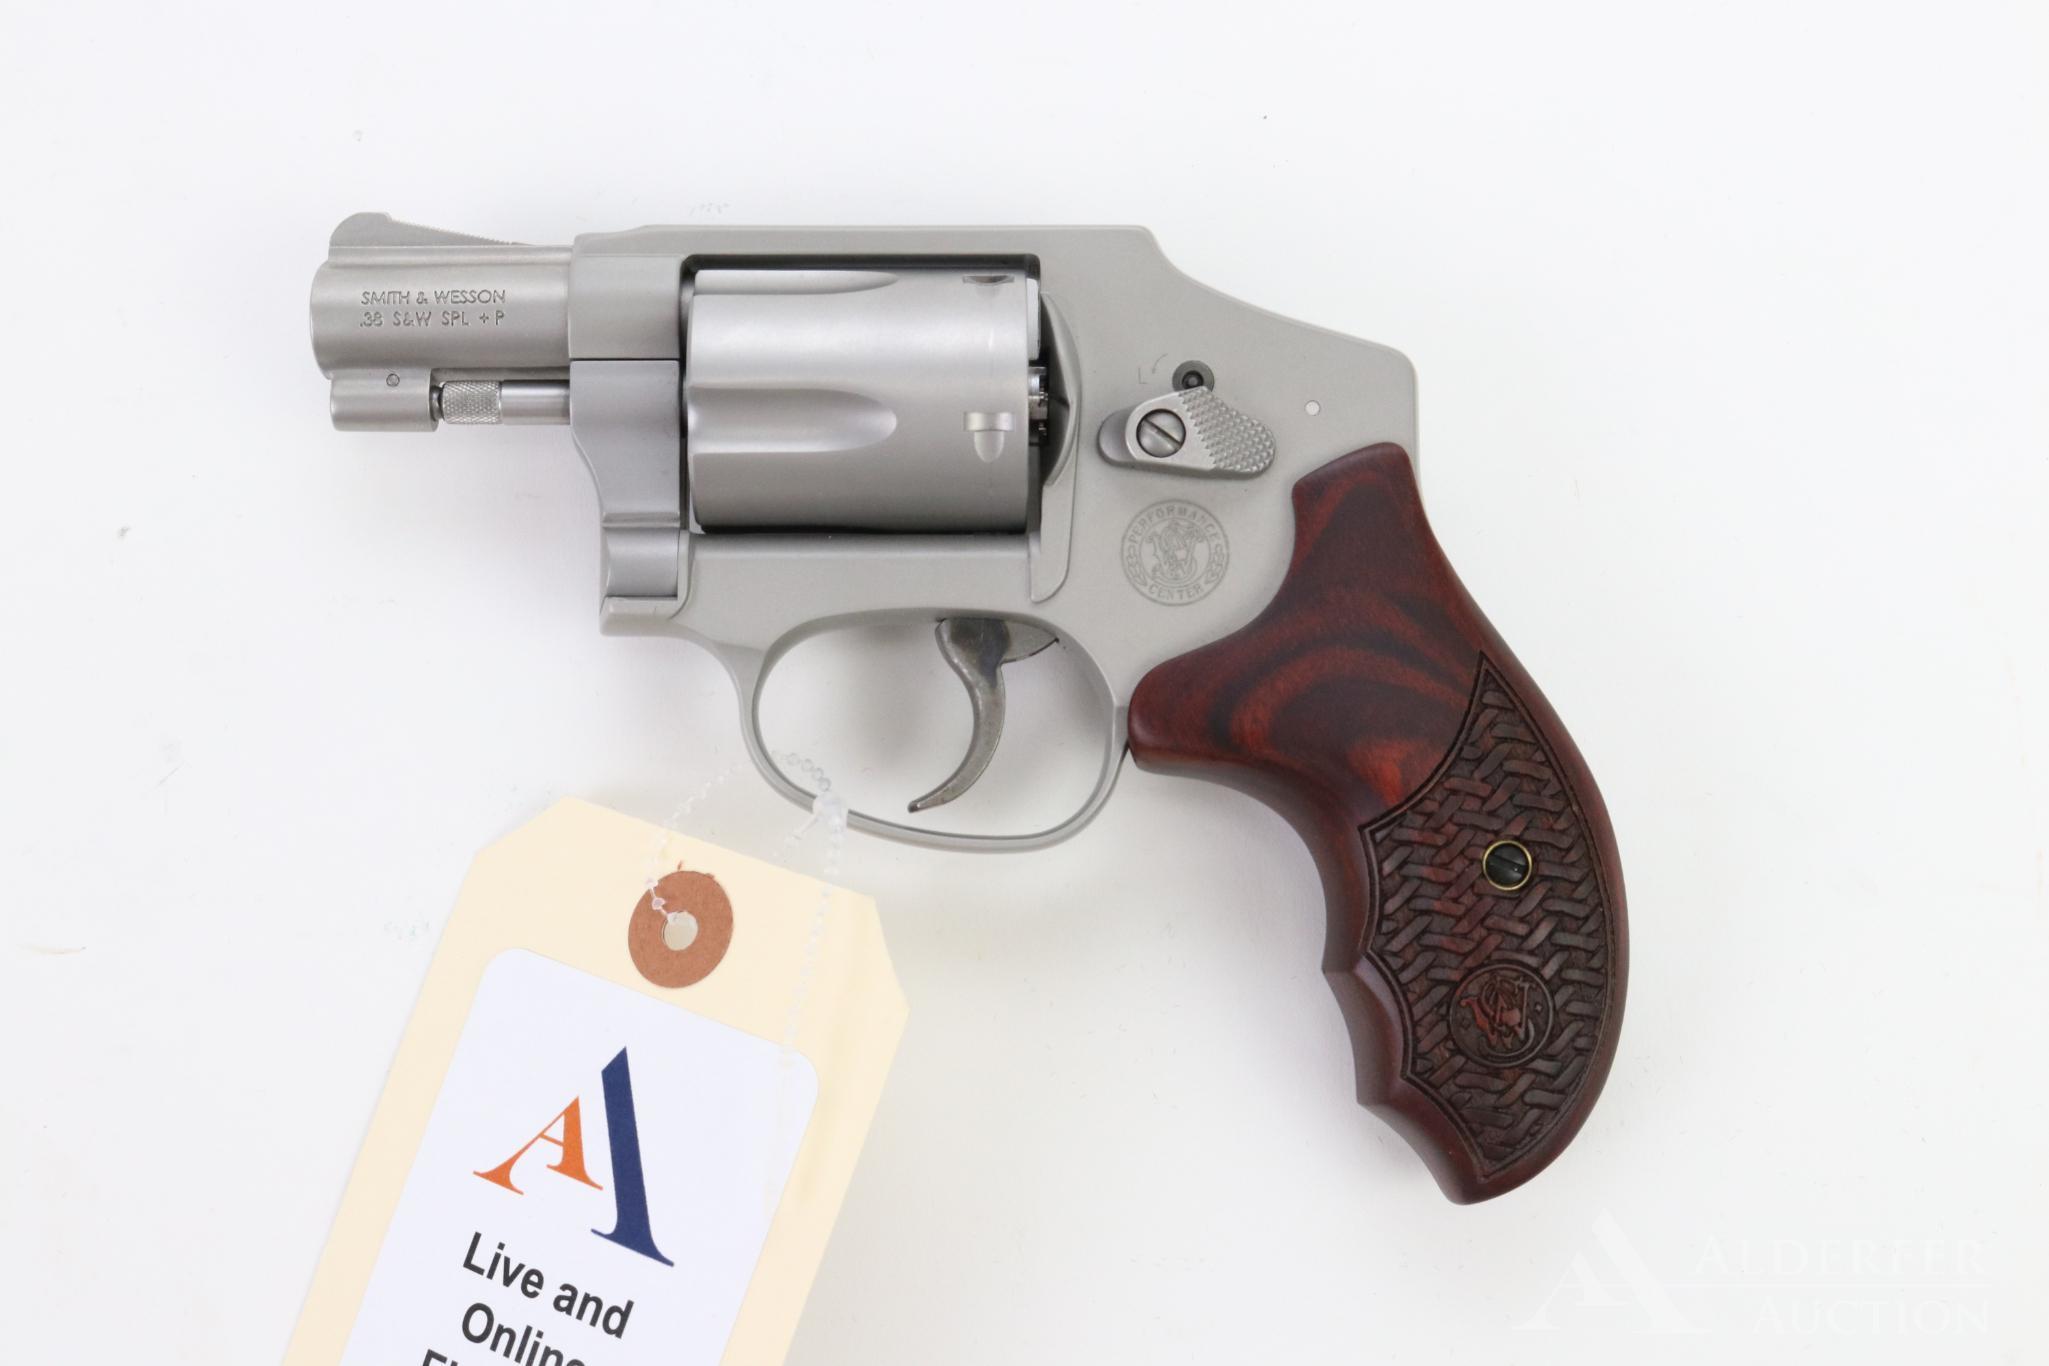 Smith & Wesson 642-2 Performance Center double action revolver.